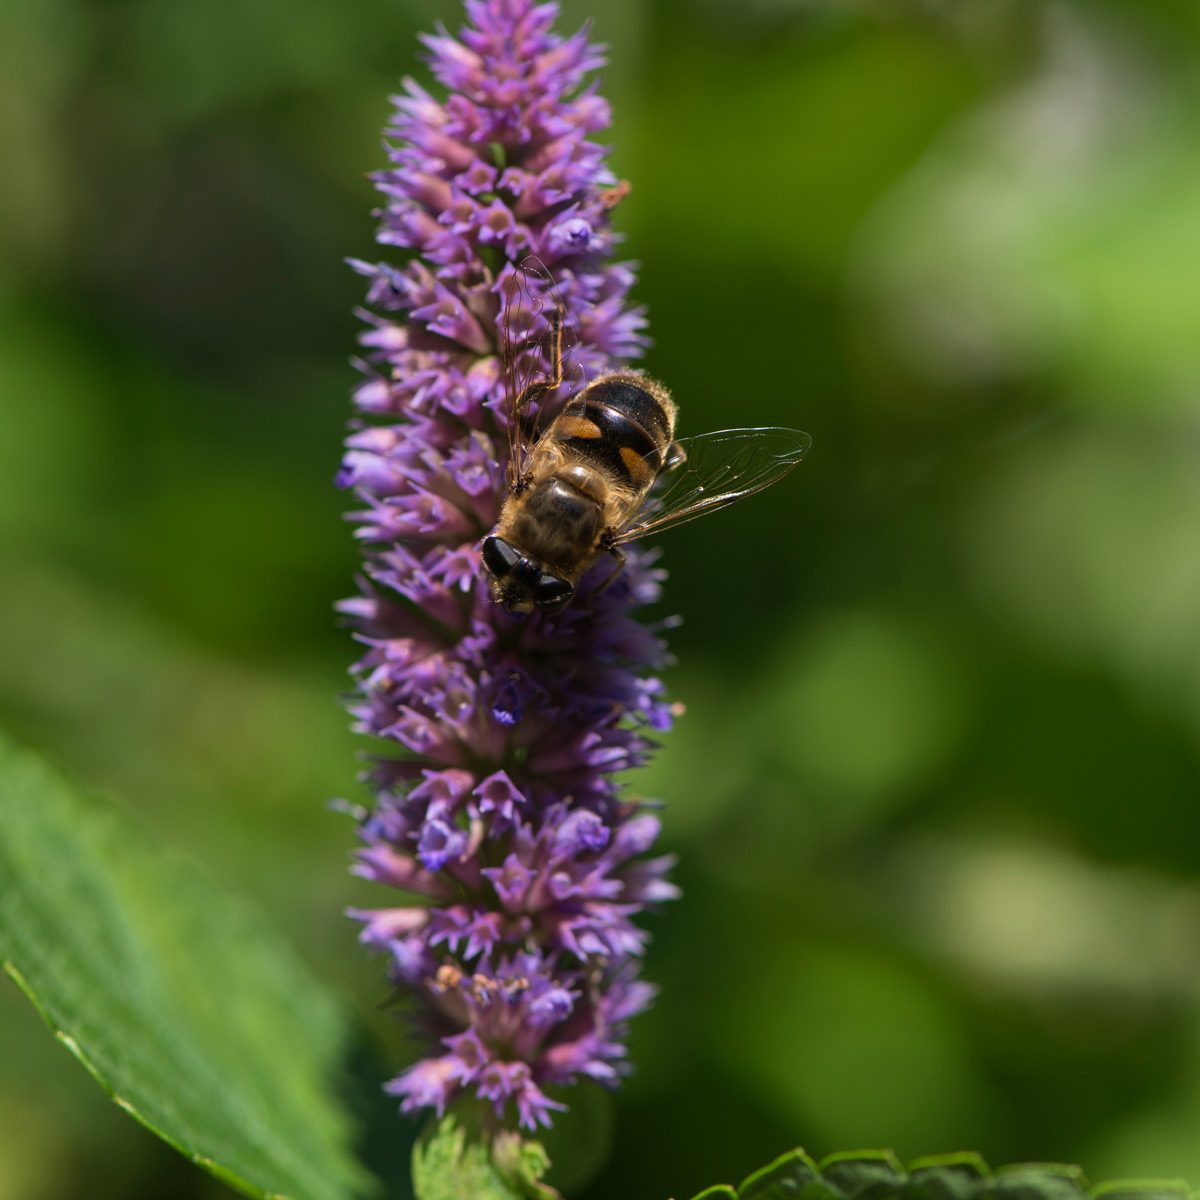 Best Flowers for Bees and Other Pollinators | Family Handyman